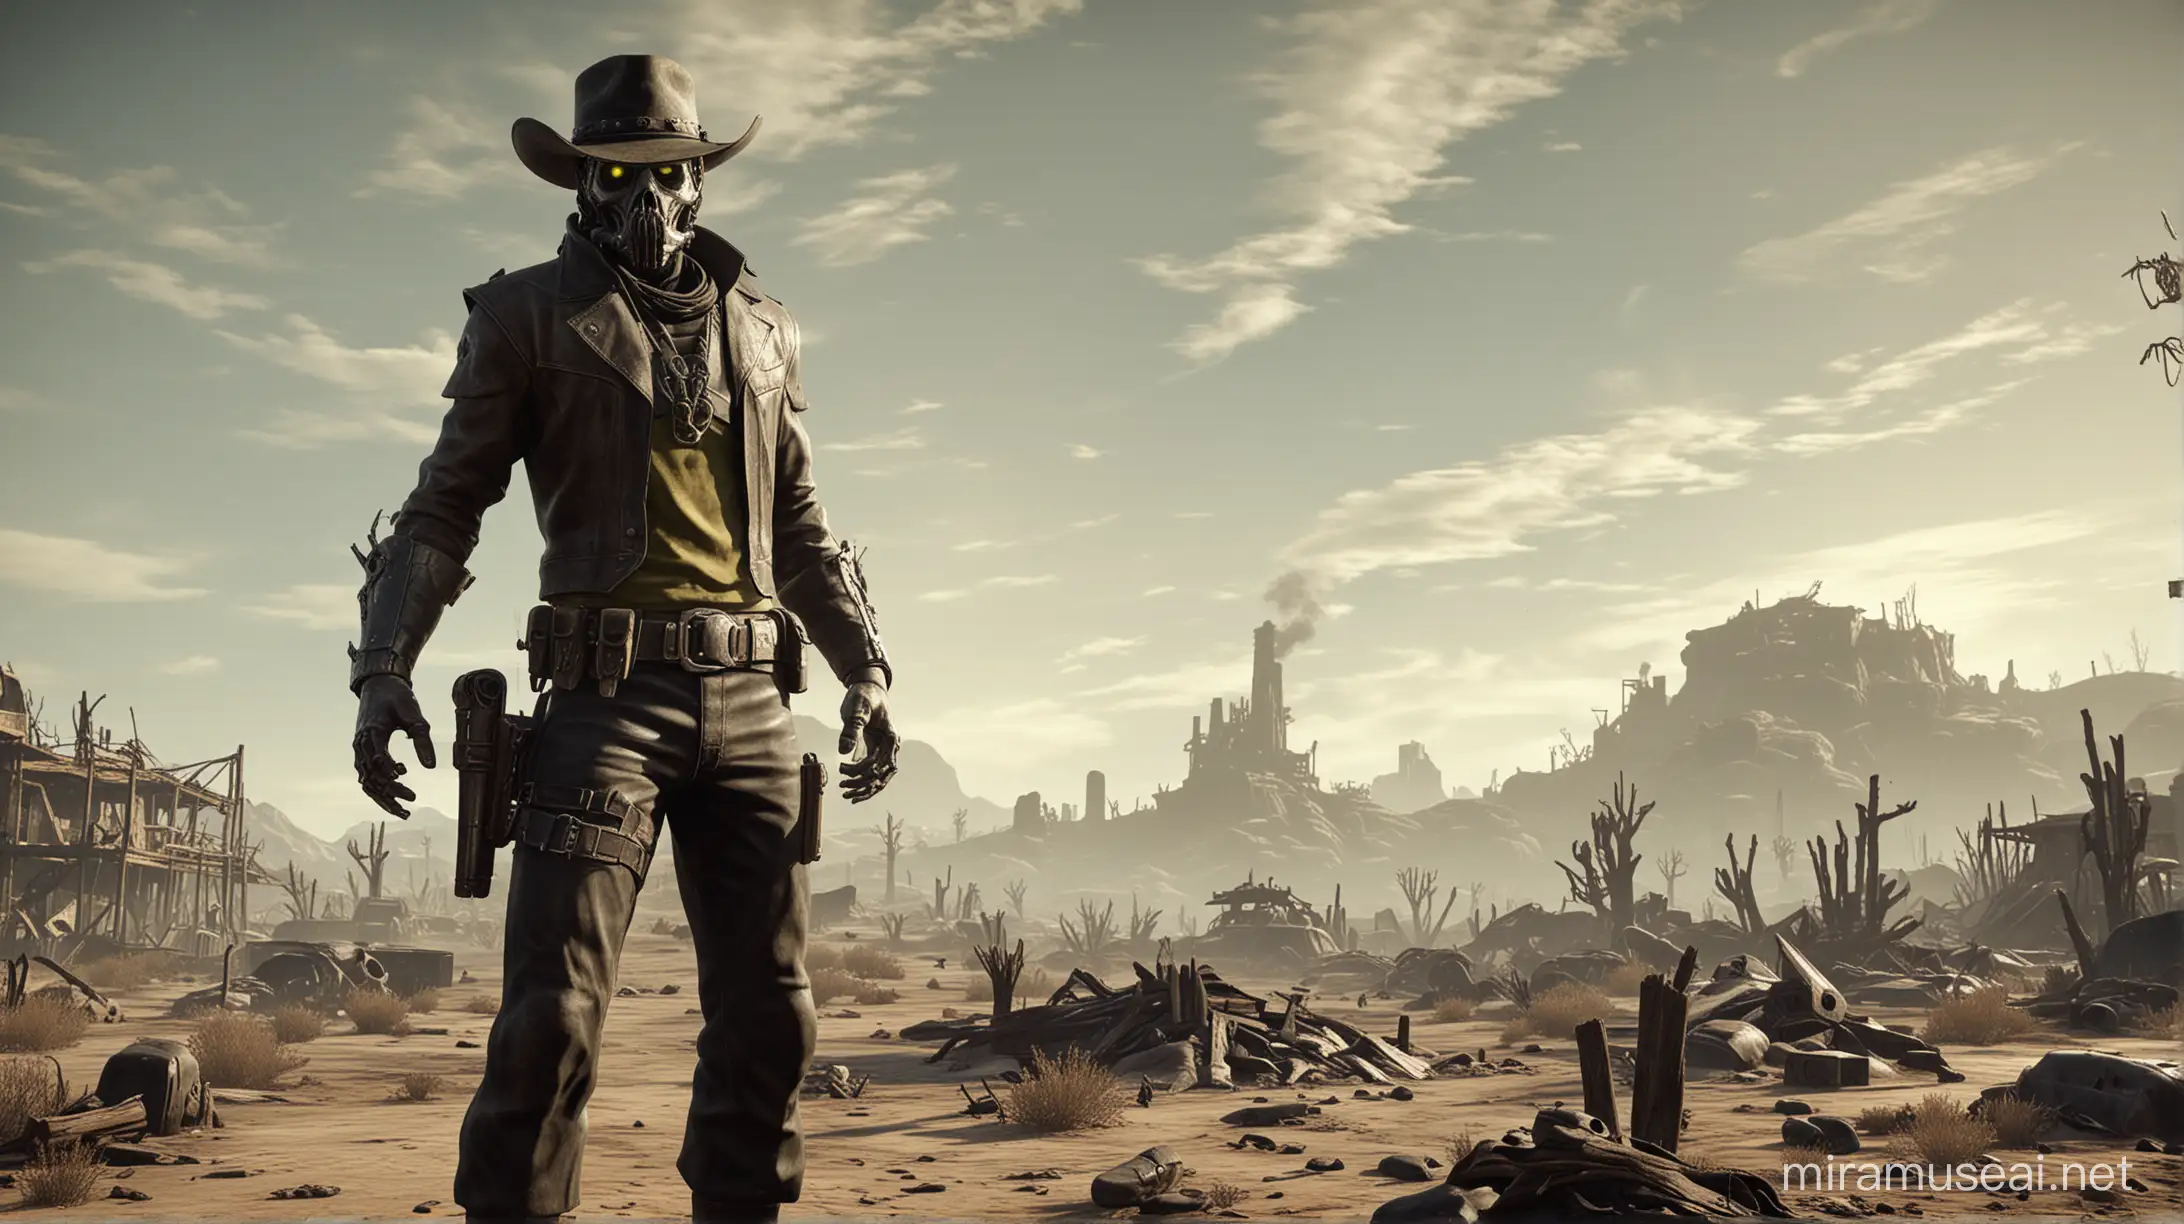 game graphics, fallout 4 ghoul standing with his hands up, wasteland in the background. wearing a cowboy hat in colour